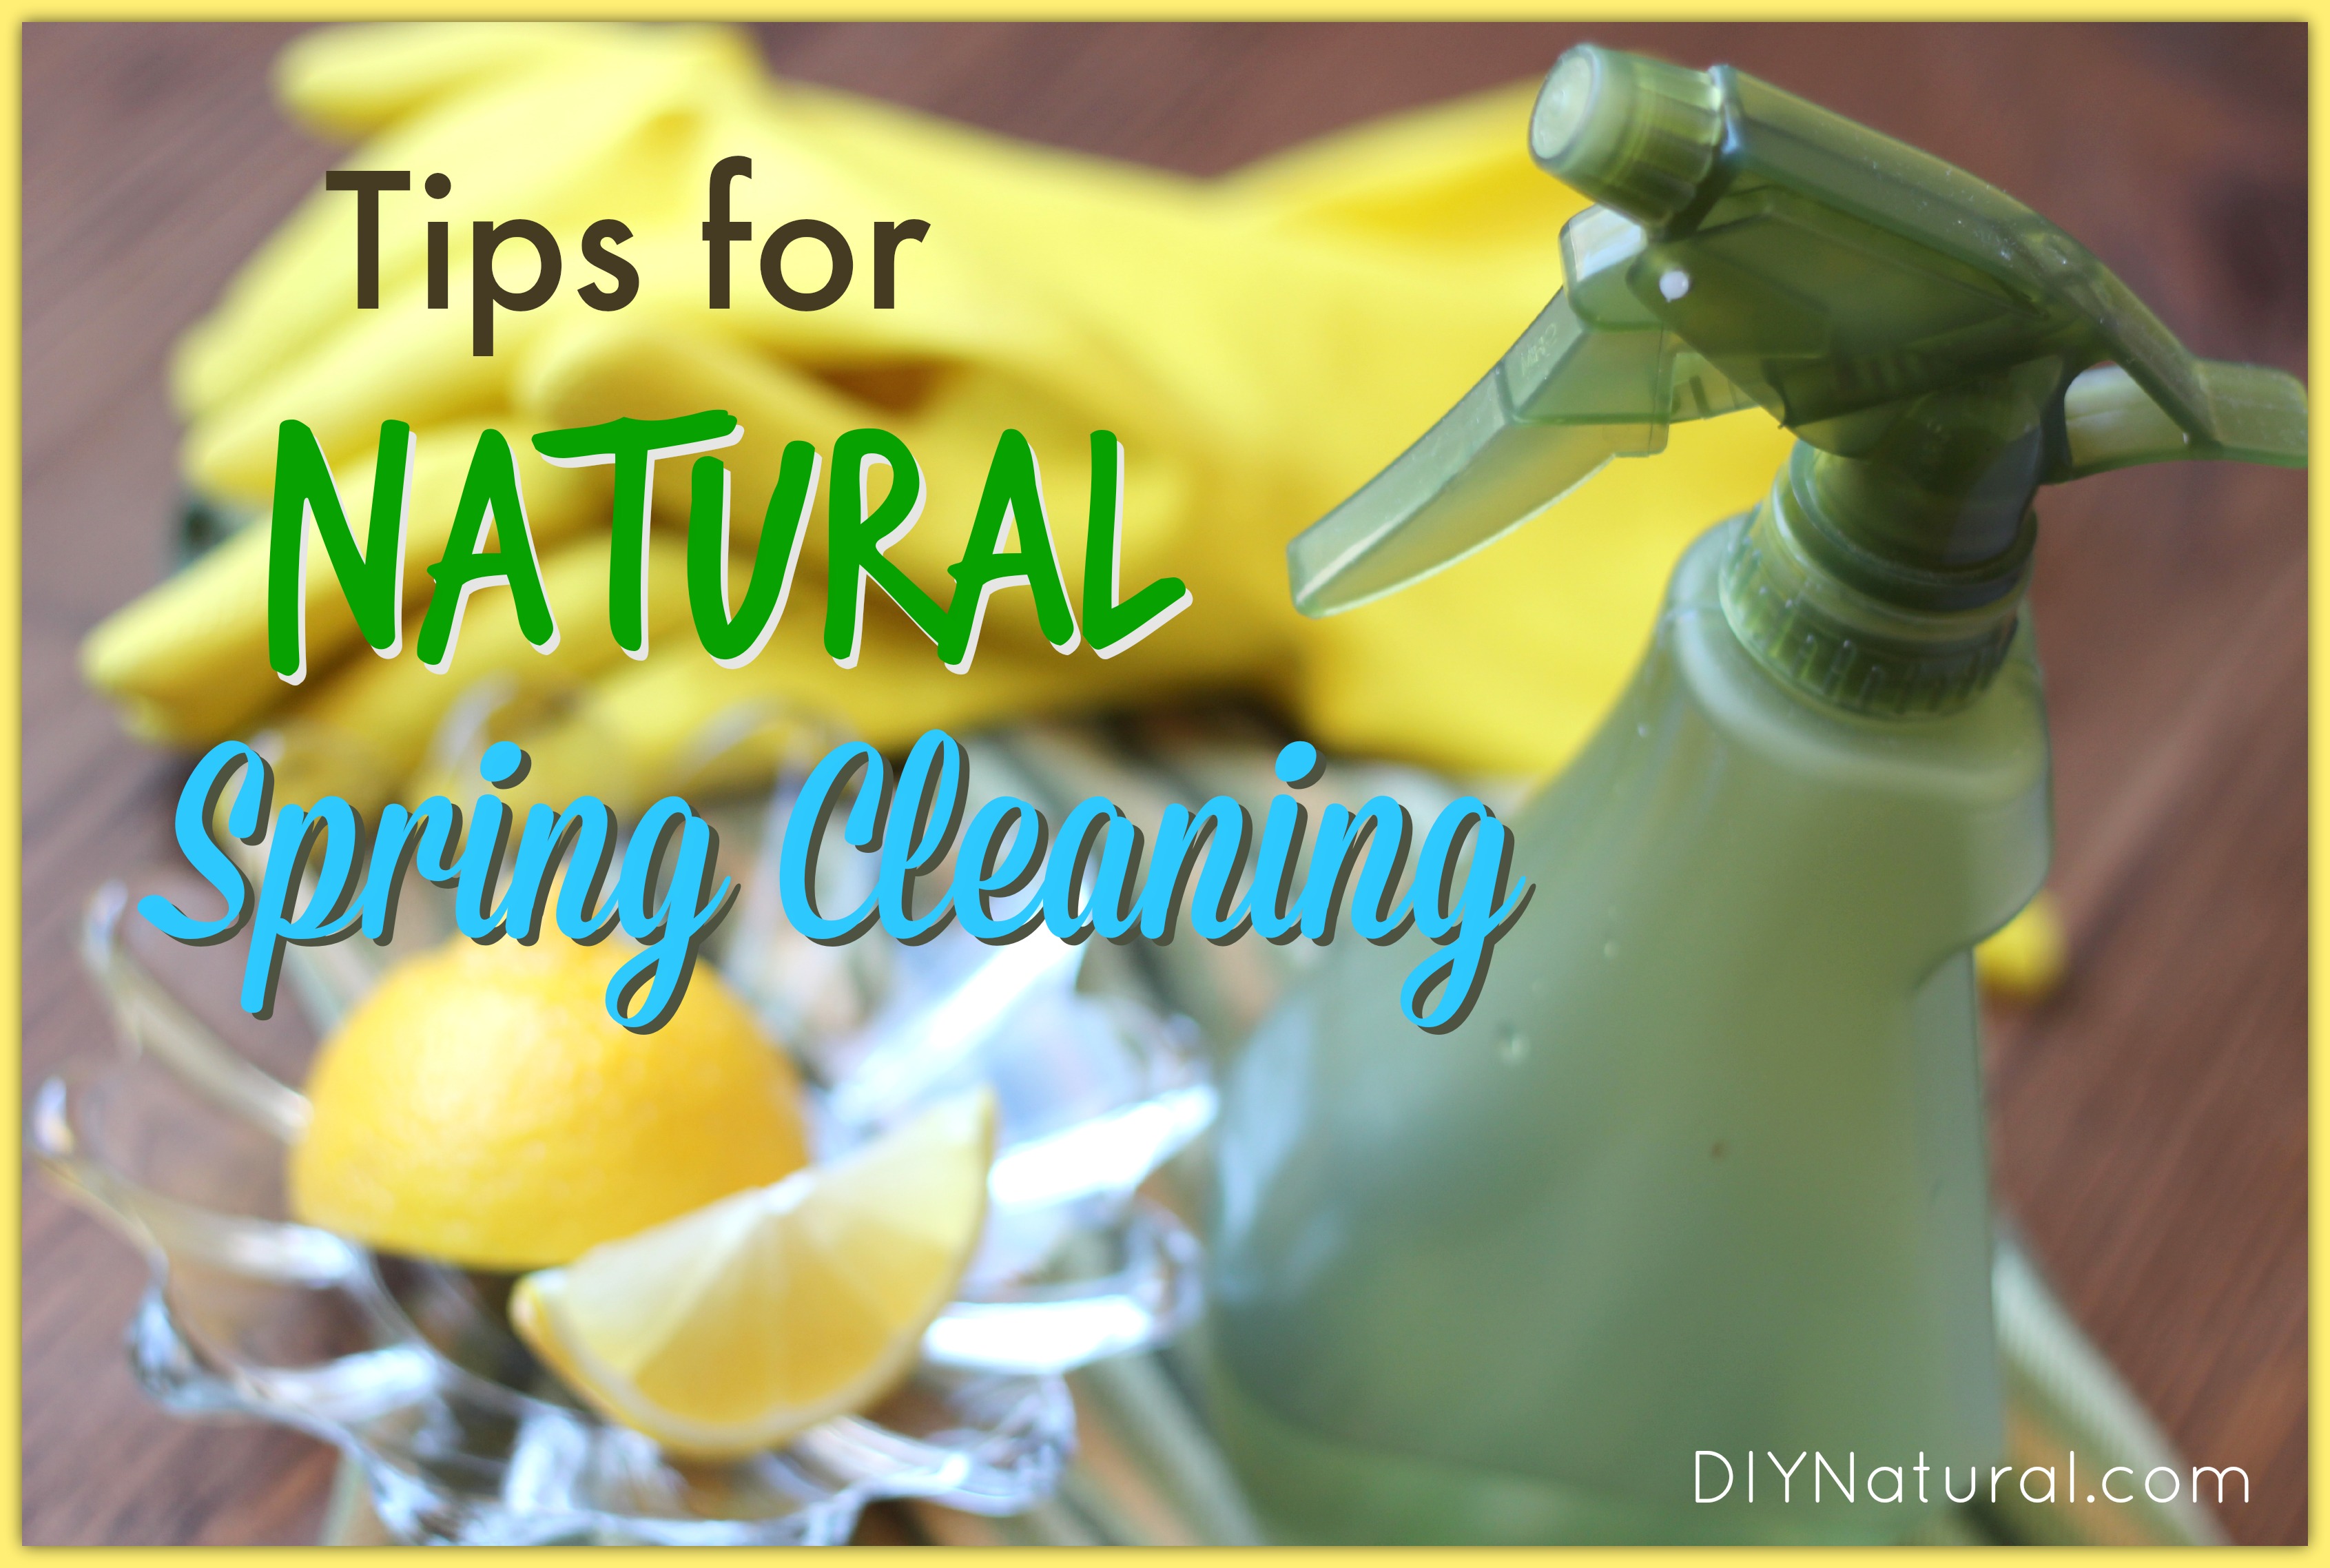 Spring Cleaning - Tips For a Naturally Clean Home